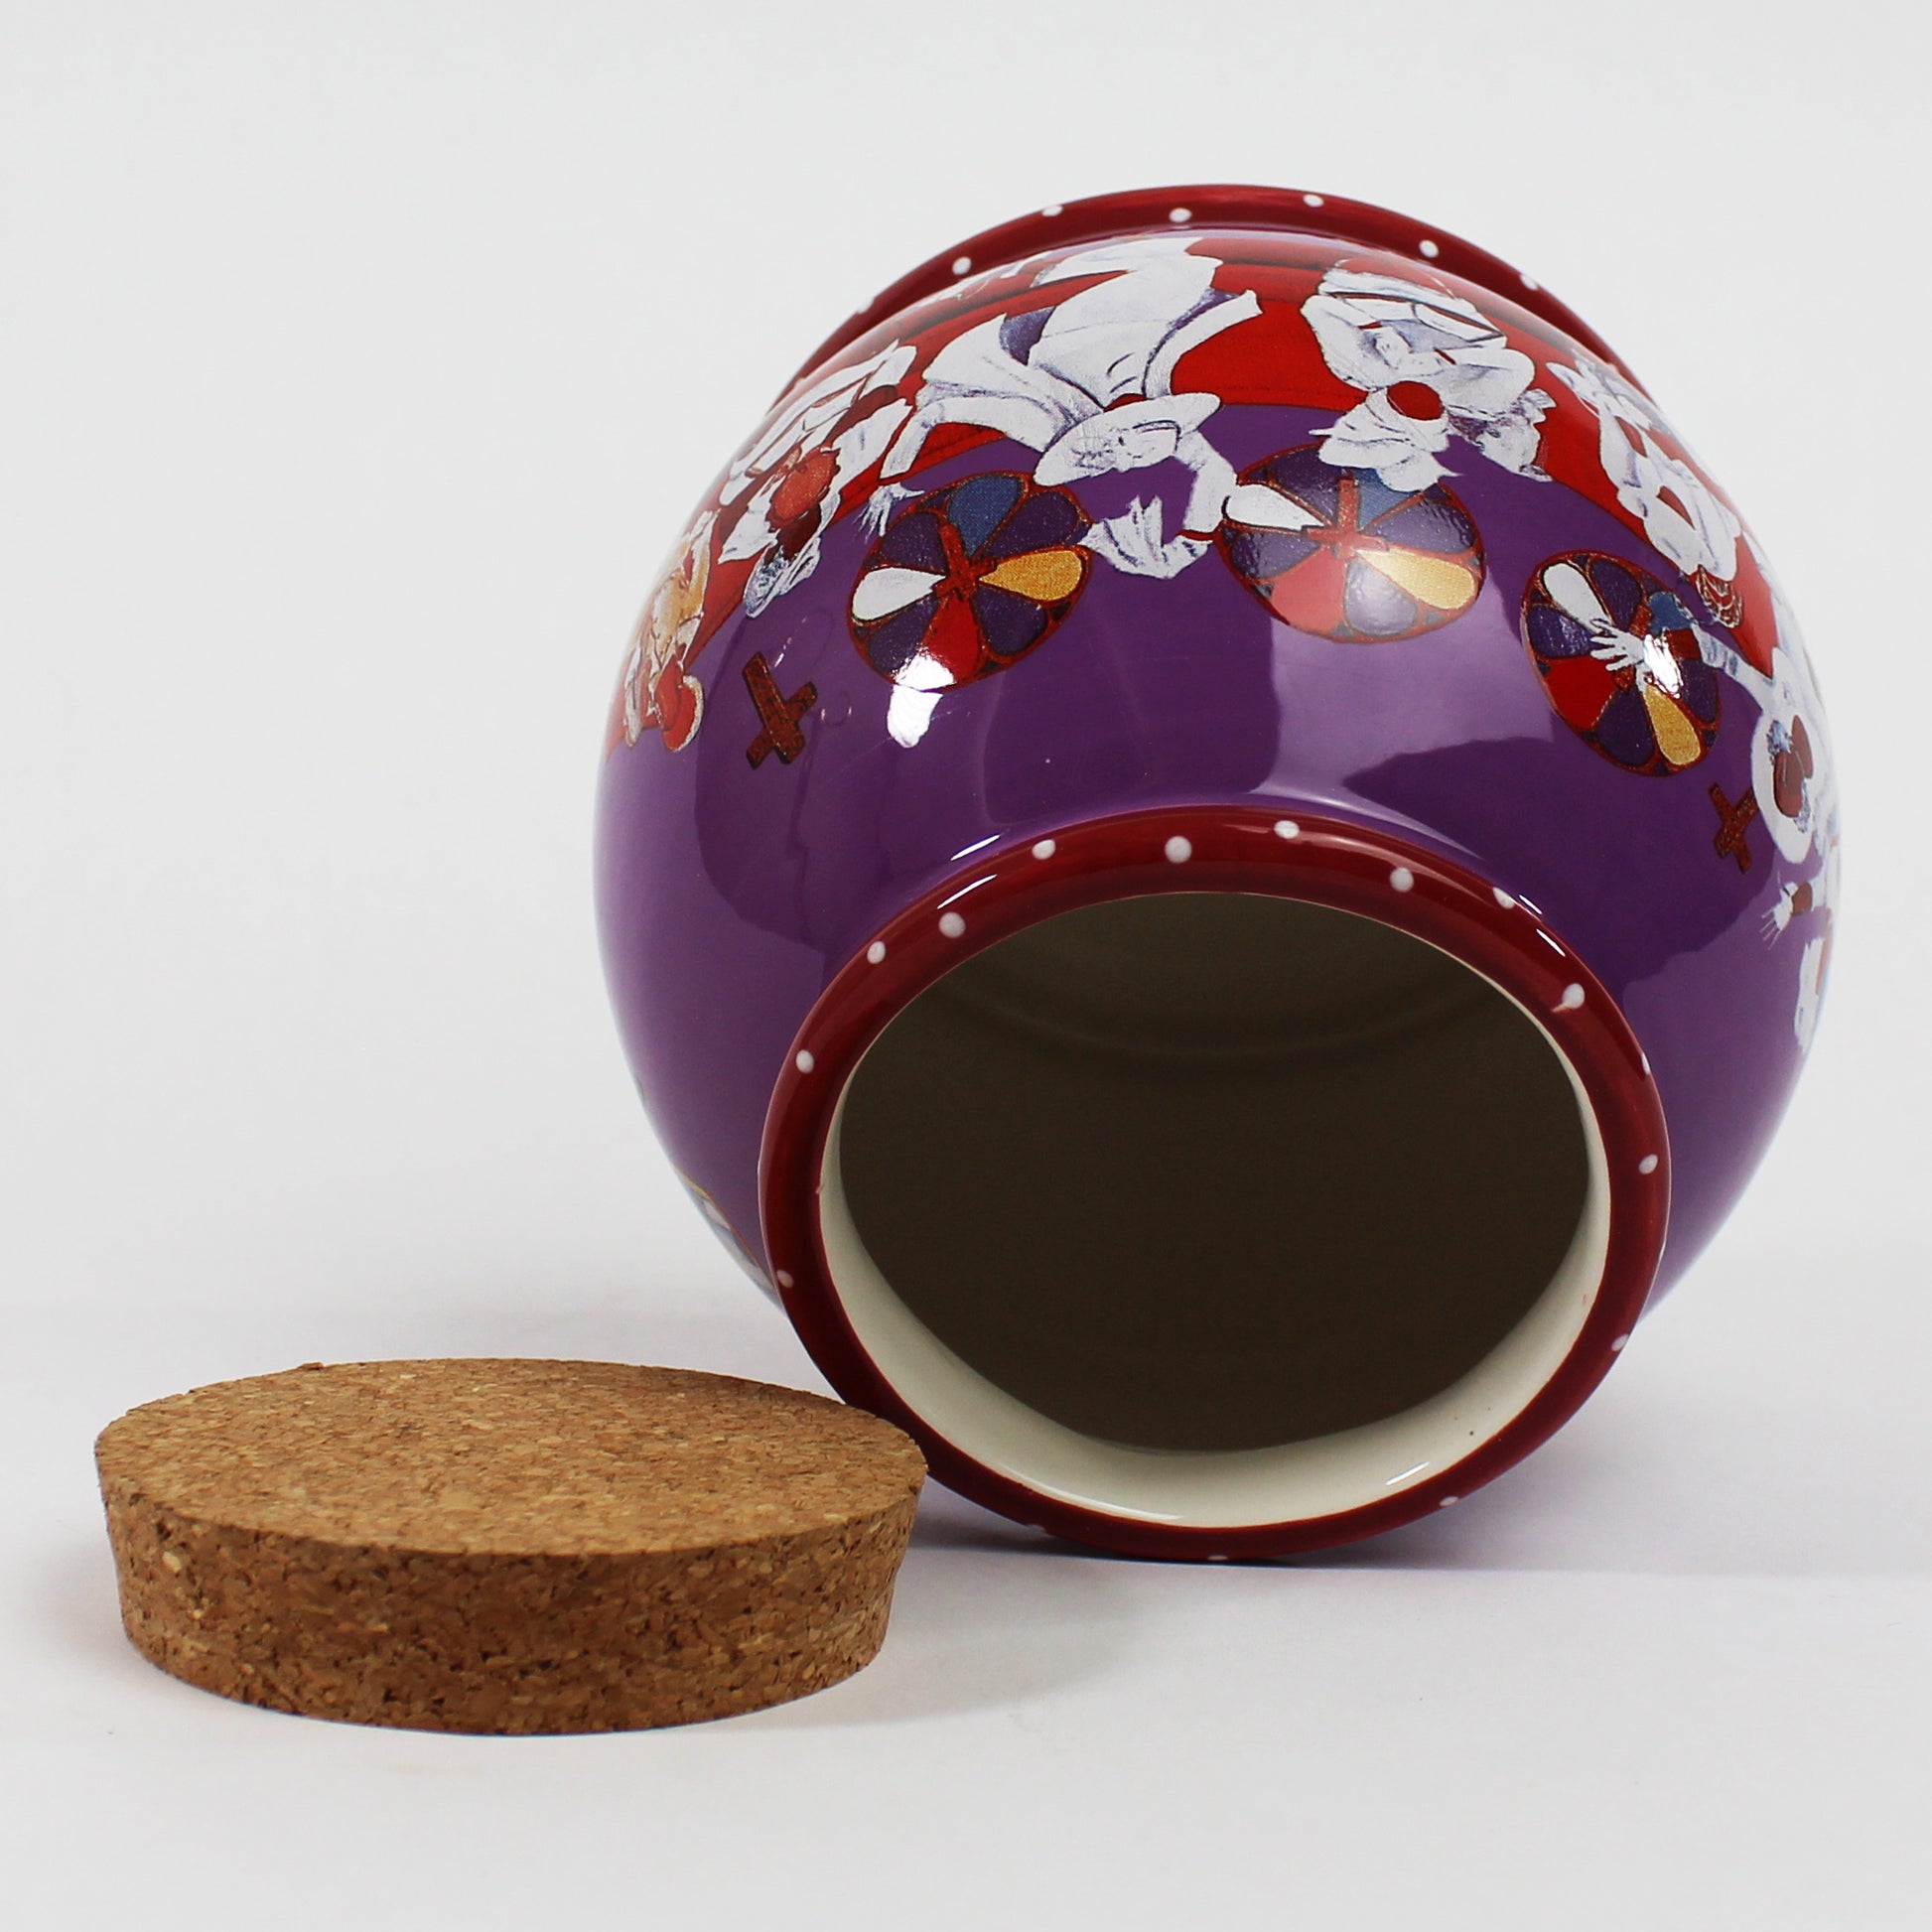 Annie Lee Worship Jar #6124. Purple and red - open